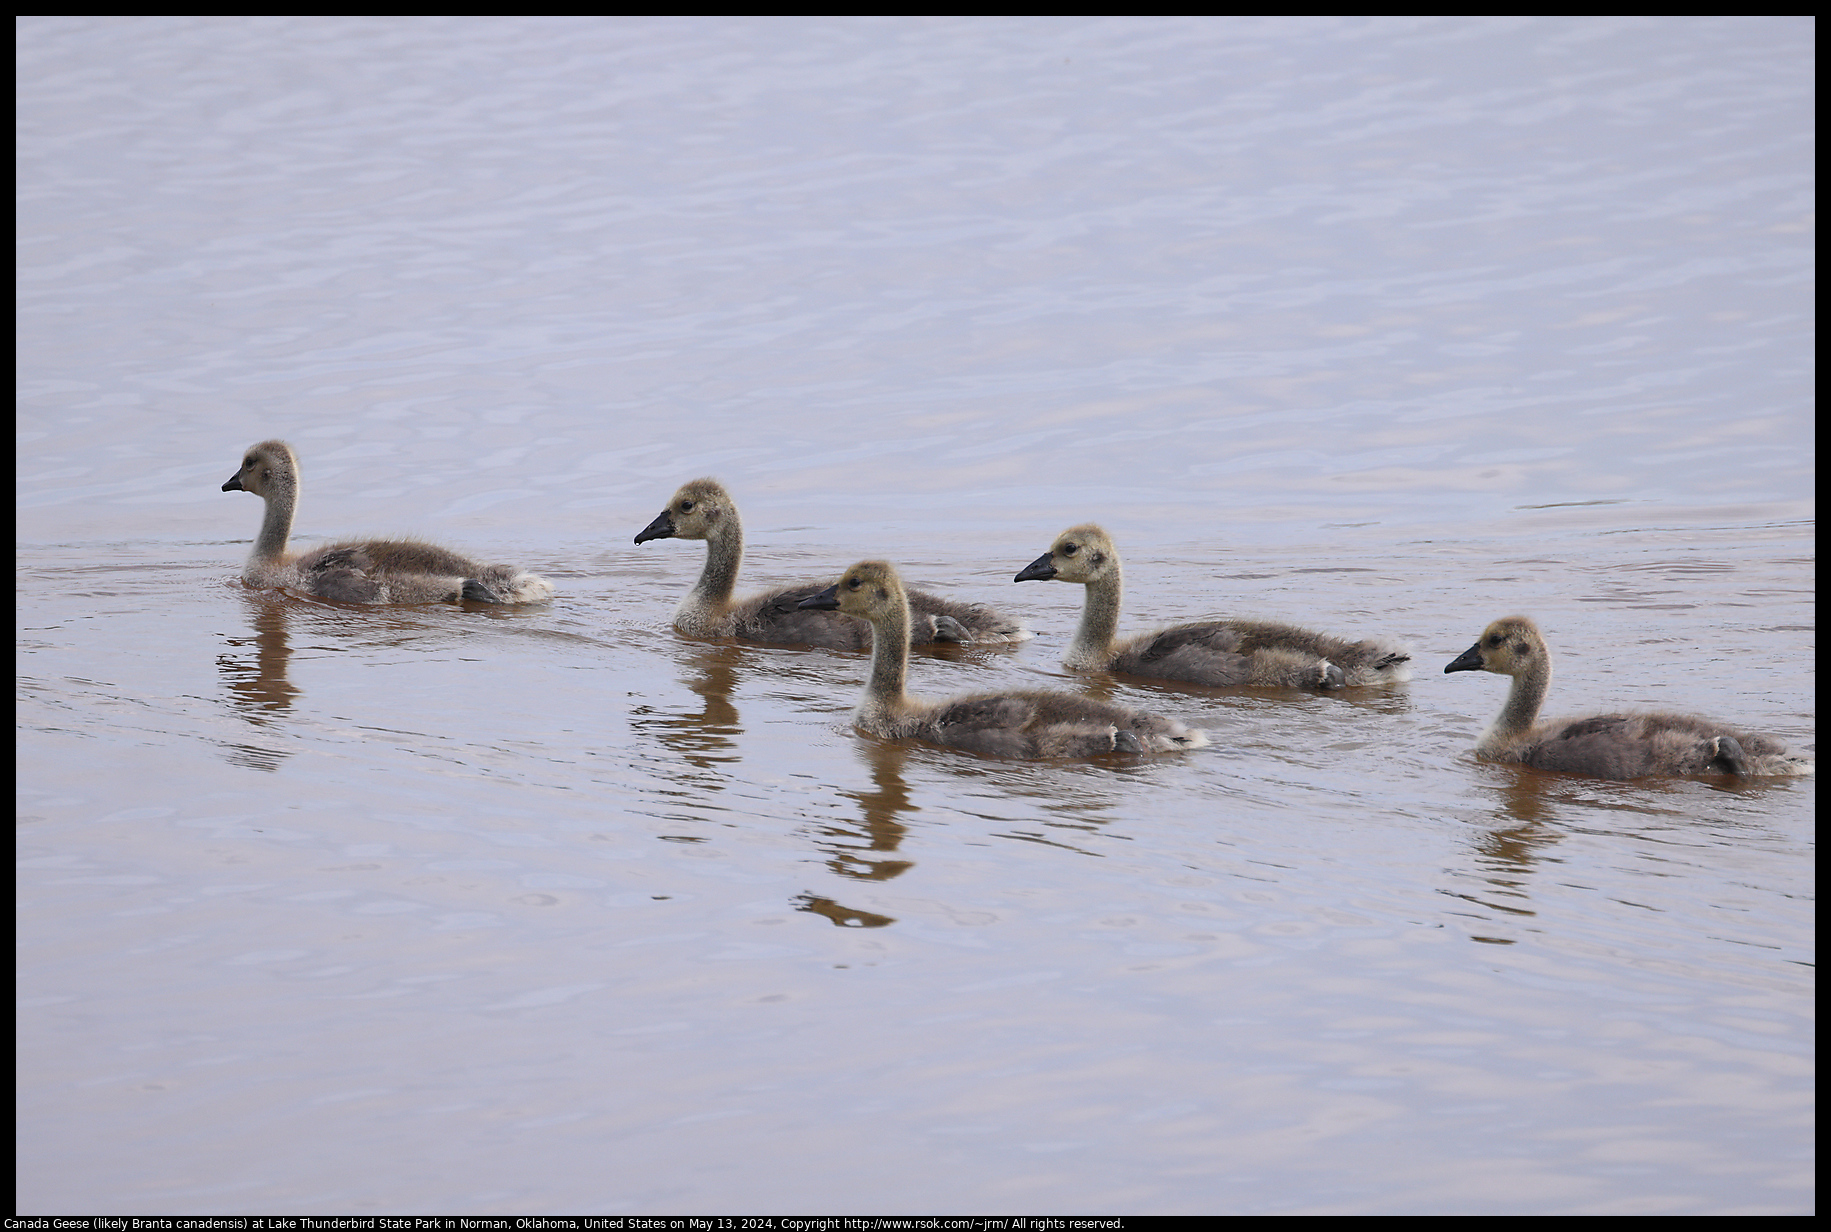 Canada Geese (likely Branta canadensis) at Lake Thunderbird State Park in Norman, Oklahoma, United States on May 13, 2024